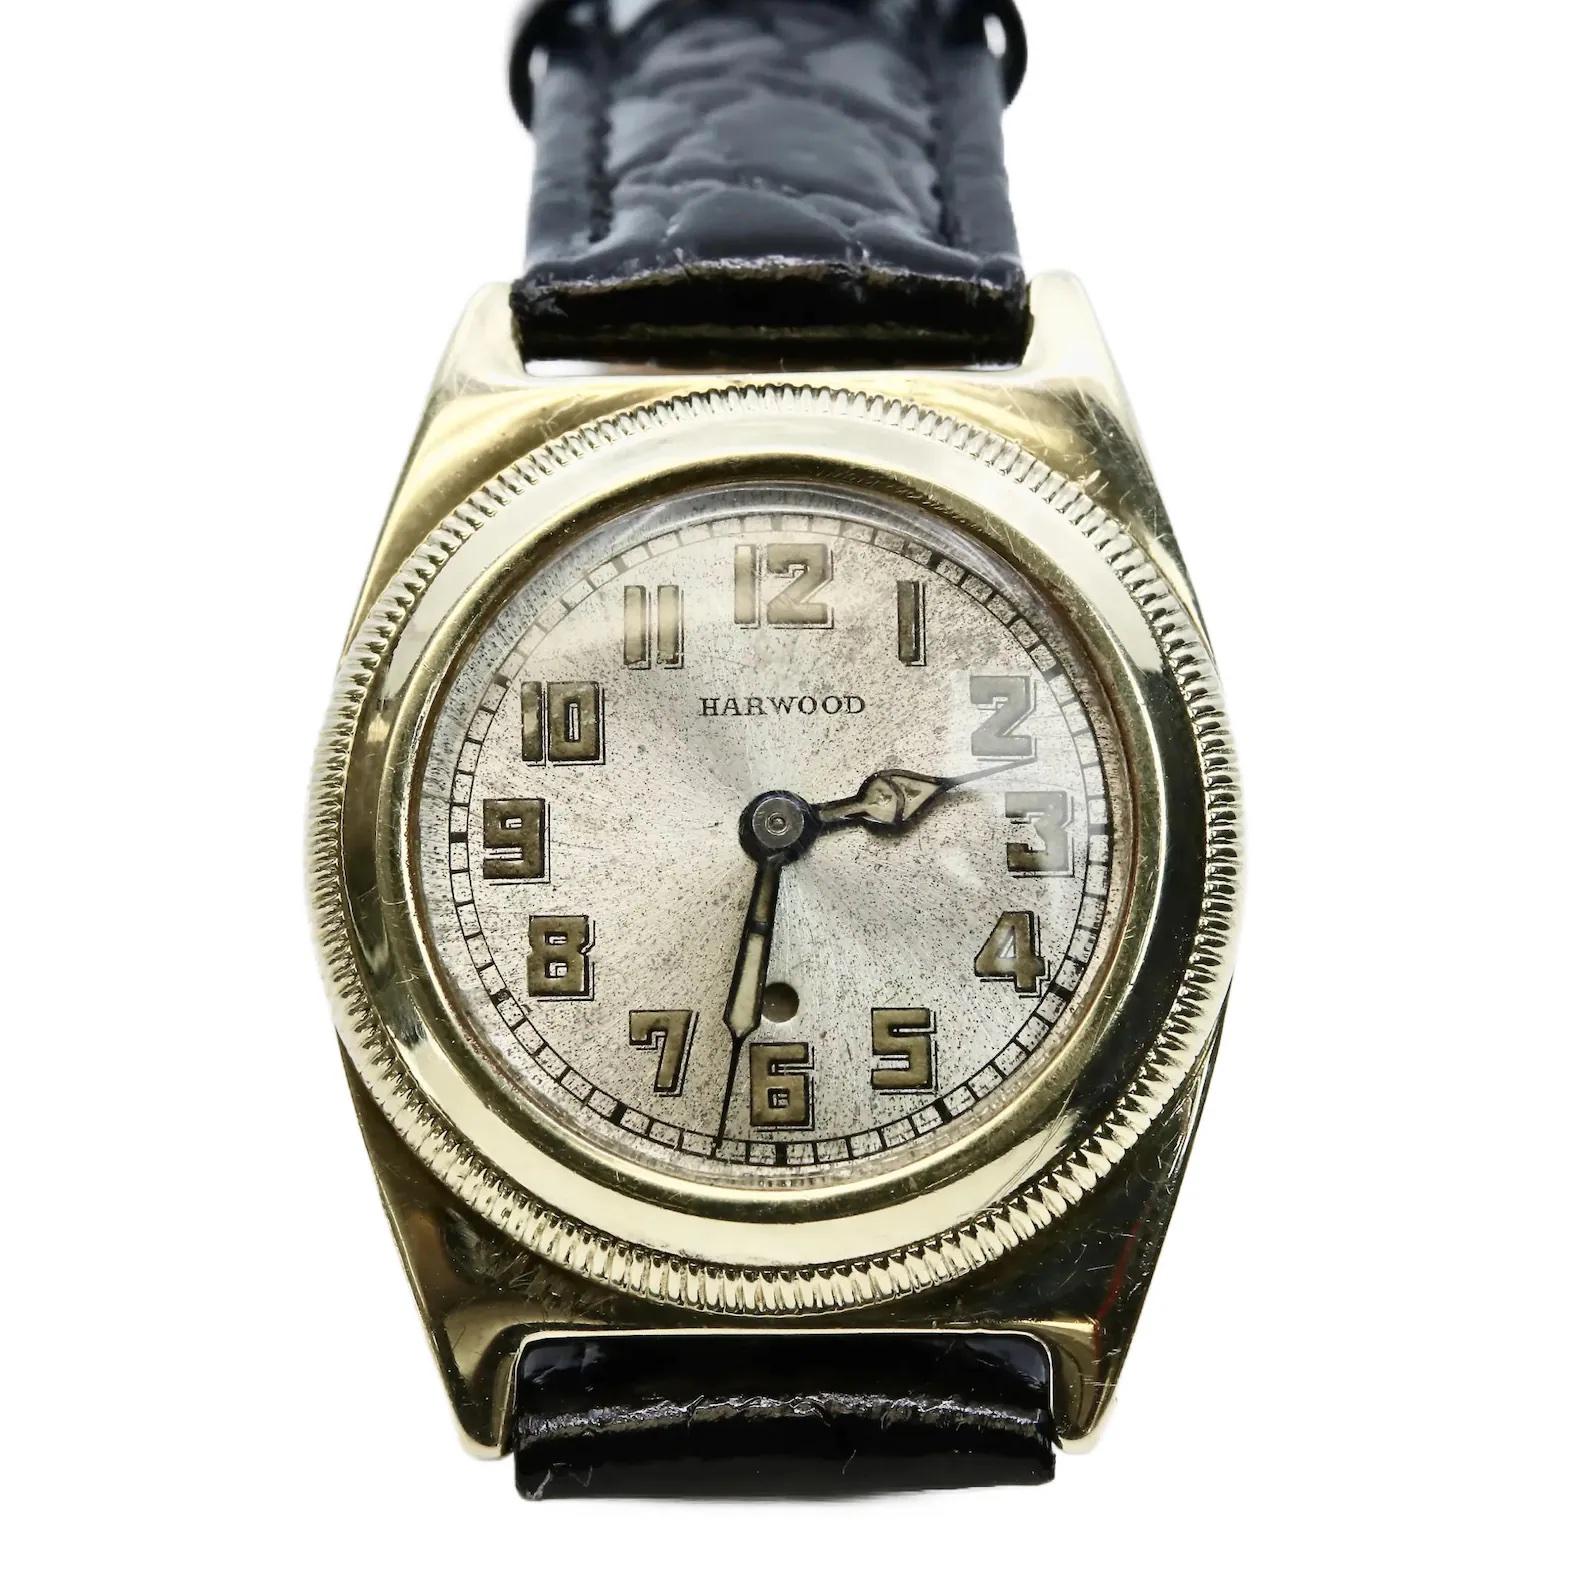 A rare early example of a John Harwood wrist watch circa the early 1920's. Found in a very rare solid 14 karat gold case, this watch is a fantastic example of the first automatic wrist watch ever produced. This watch features a silver dial in